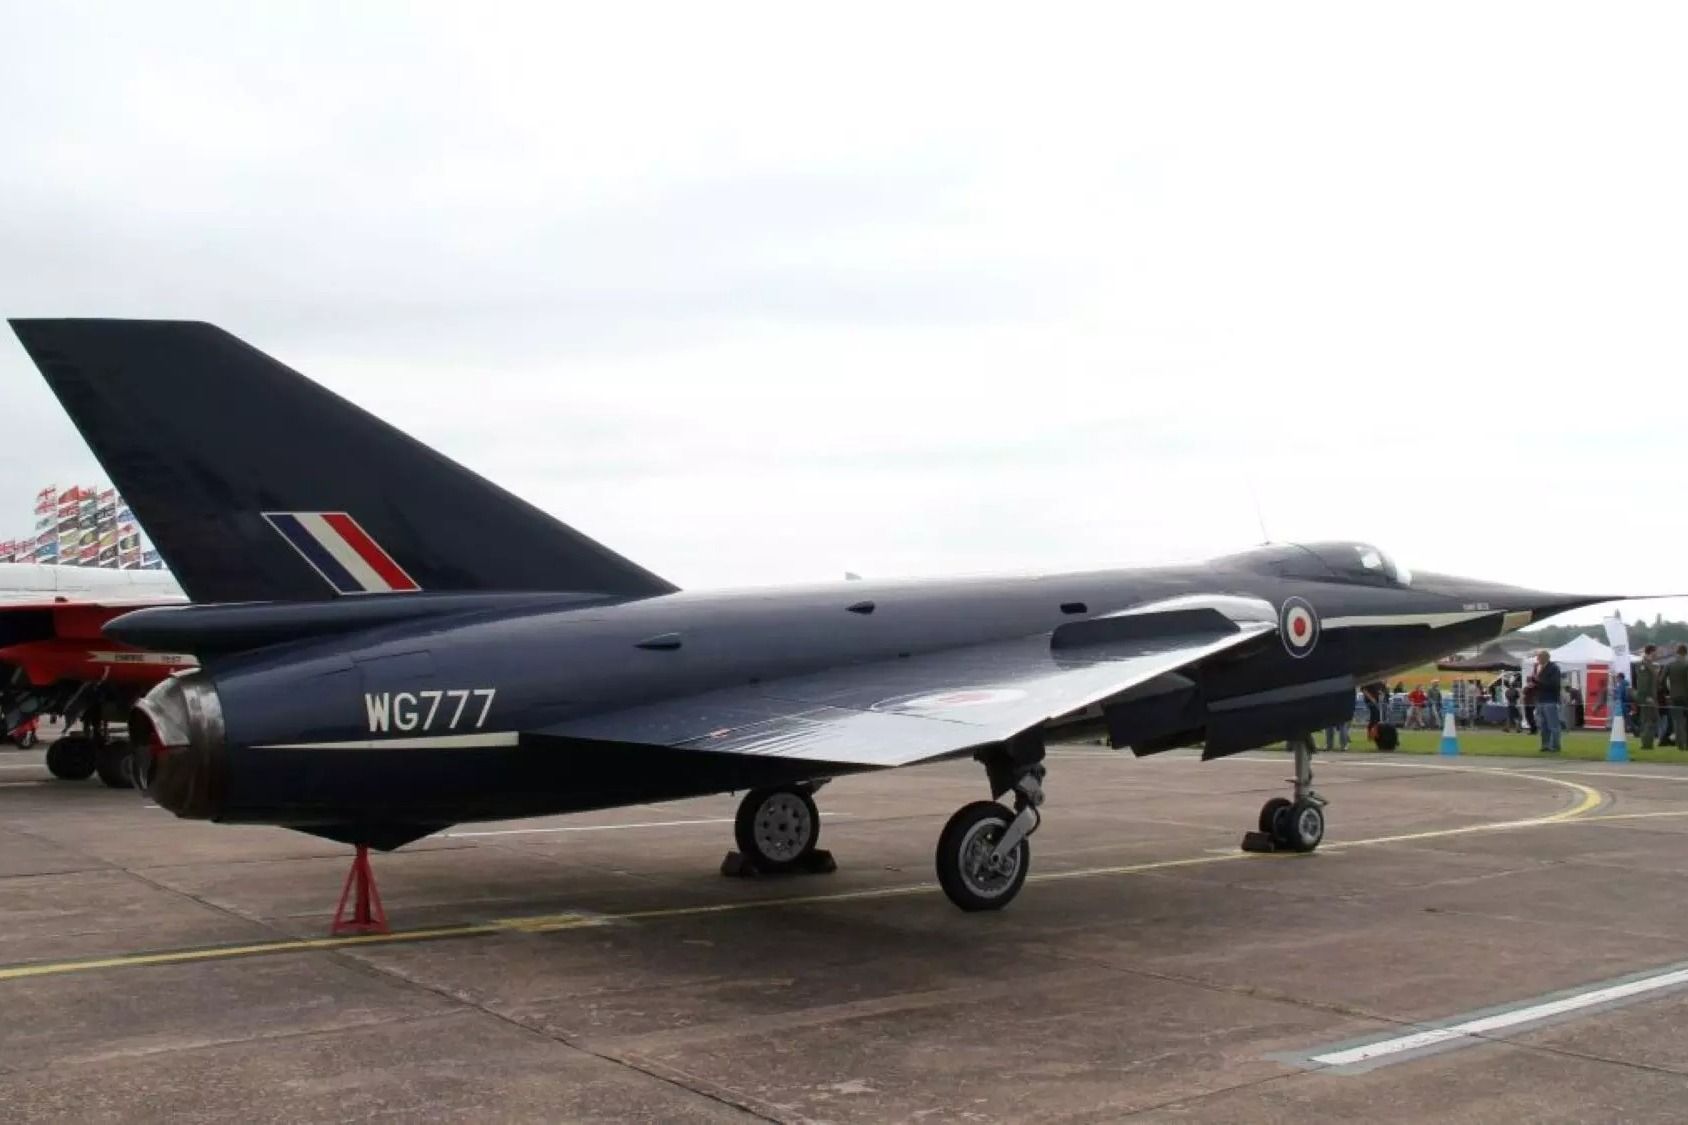 A Fairey Delta 2 on display at an airshow.